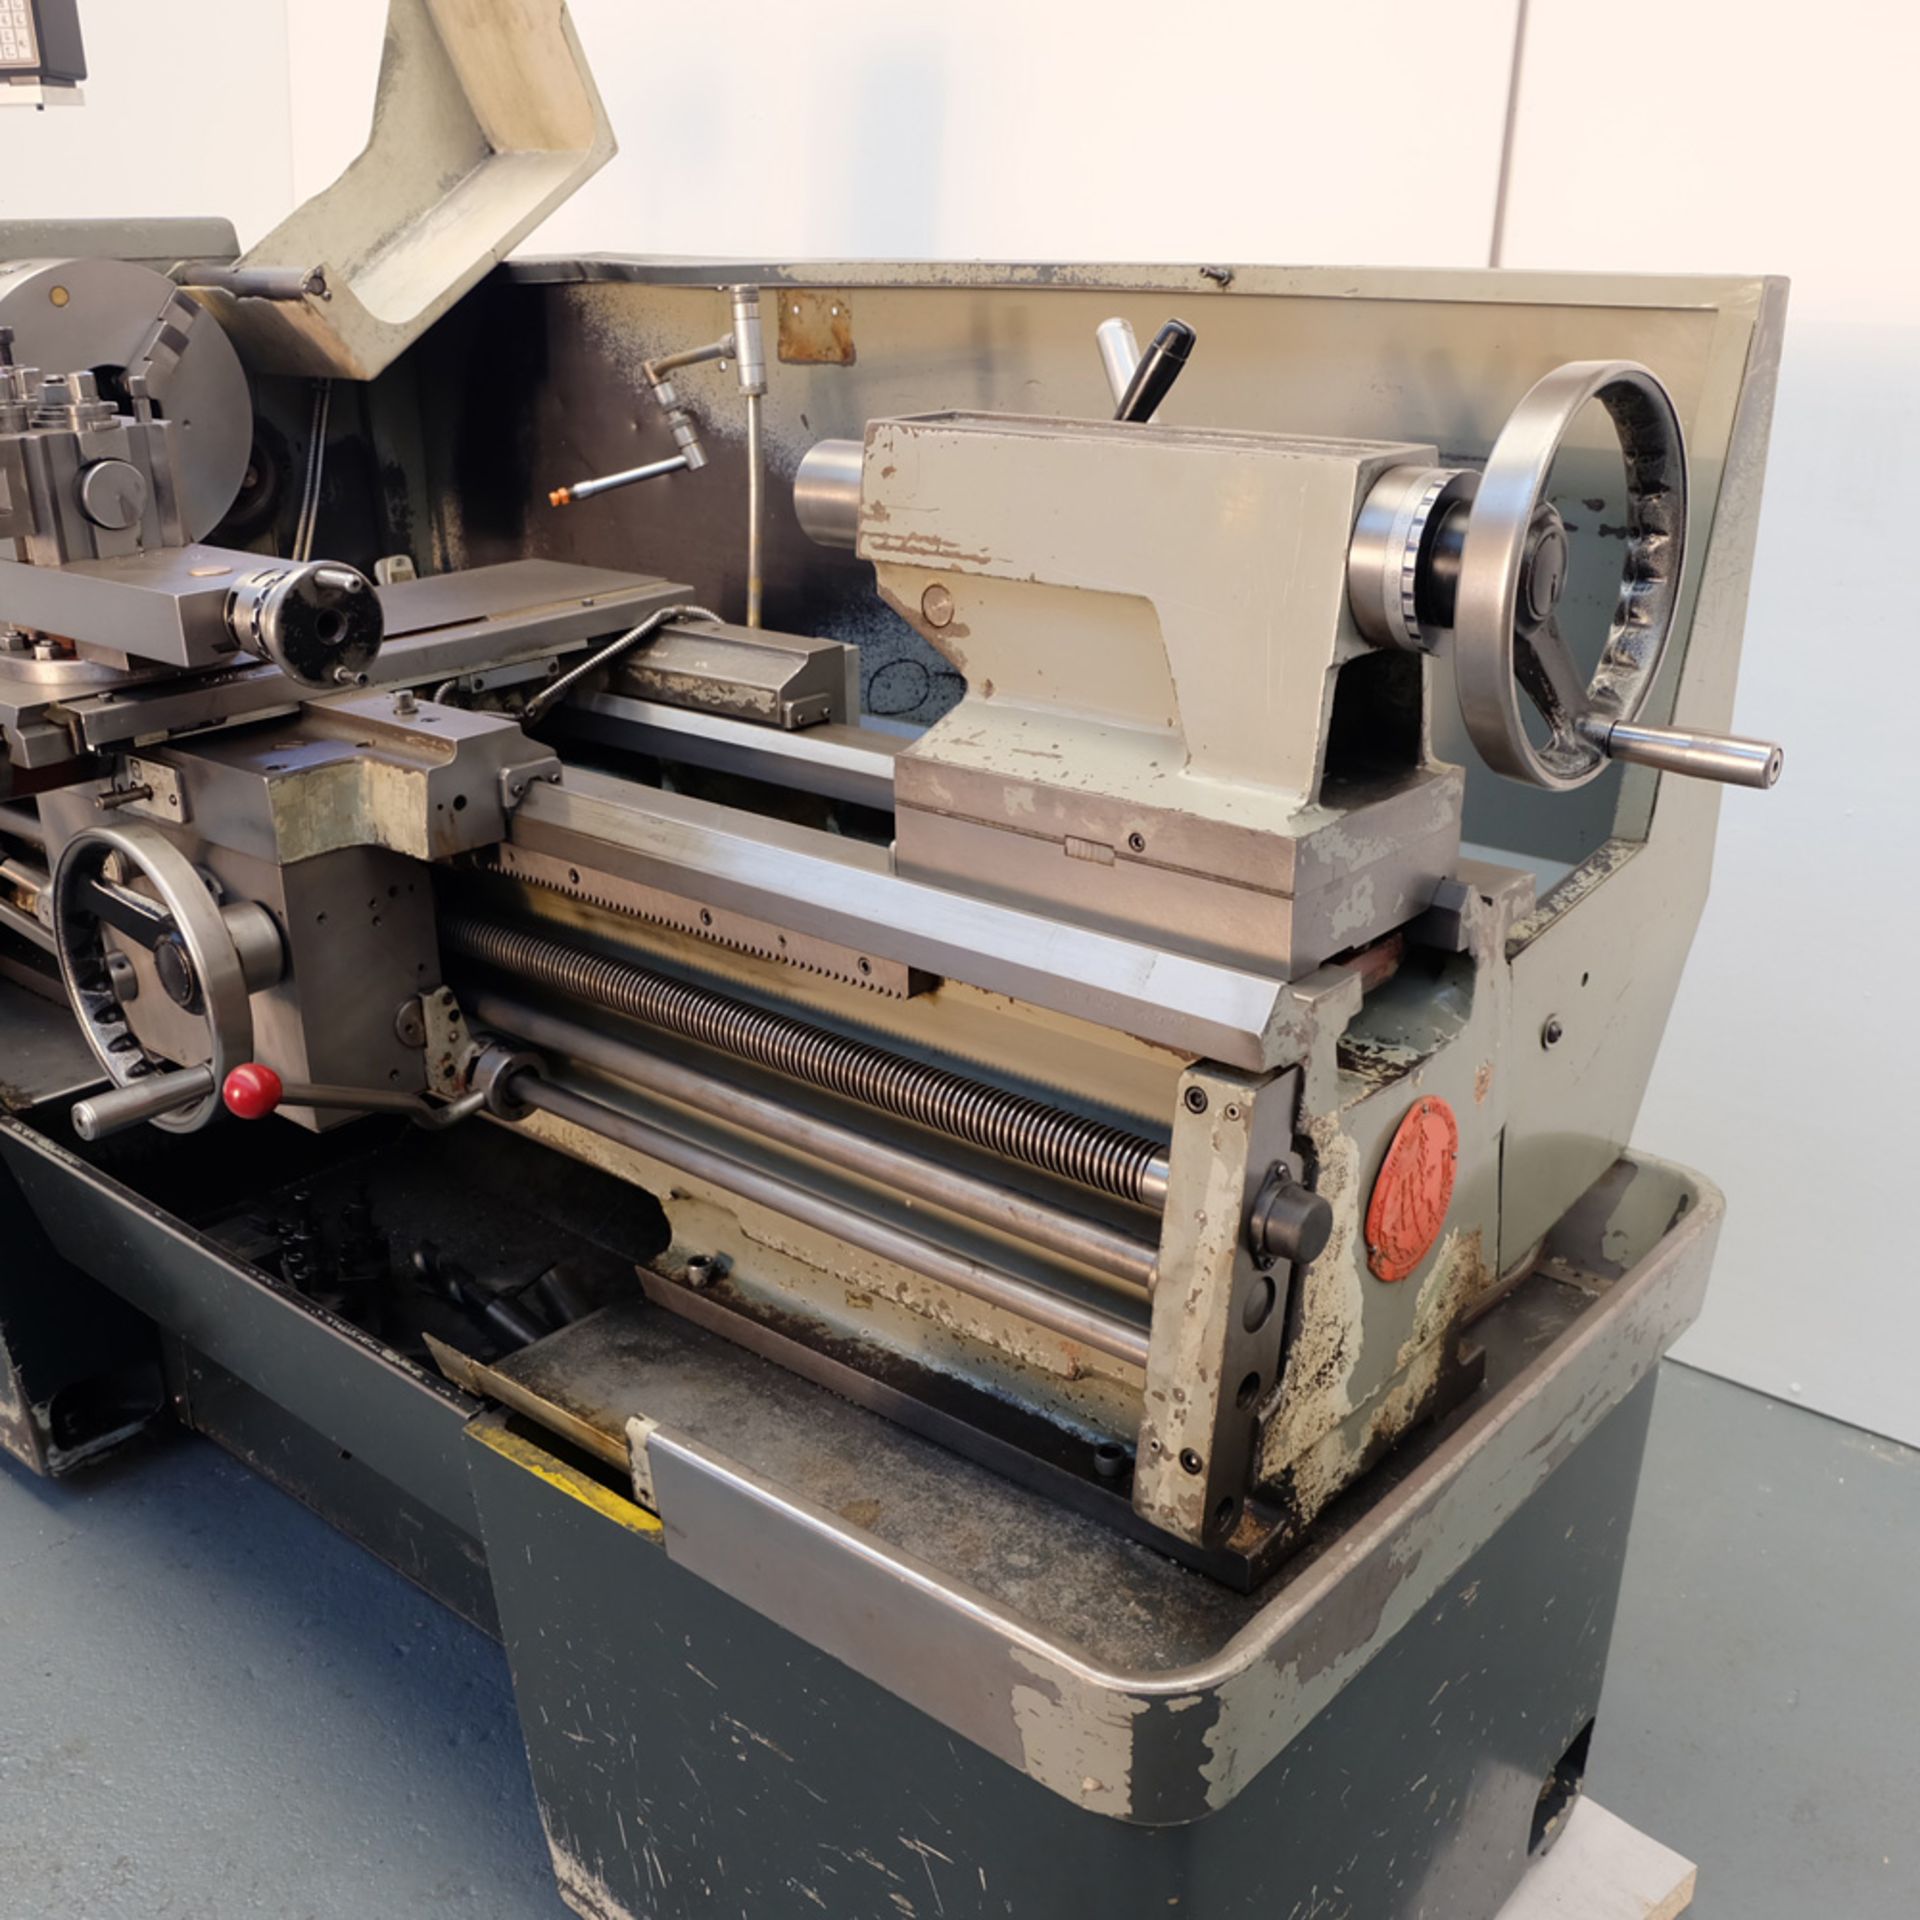 Colchester Mascot 1600 Gap Bed Centre Lathe. Swing Over Bed 17". Swing Over Cross Slide 10 1/2". - Image 8 of 13